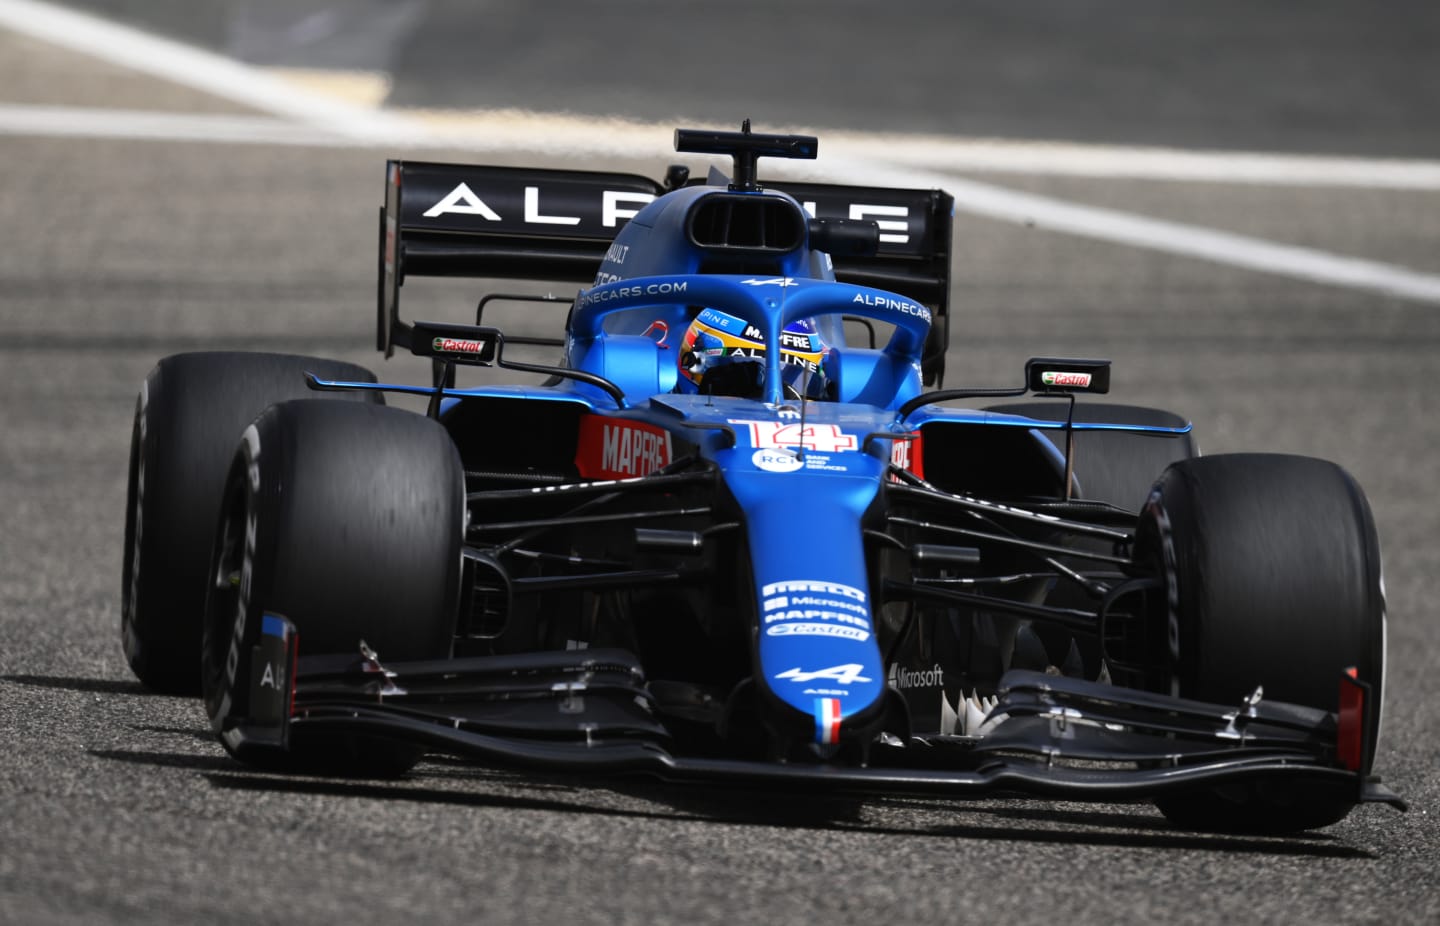 Fernando Alonso got his first taste of the new Alpine A521 on Saturday